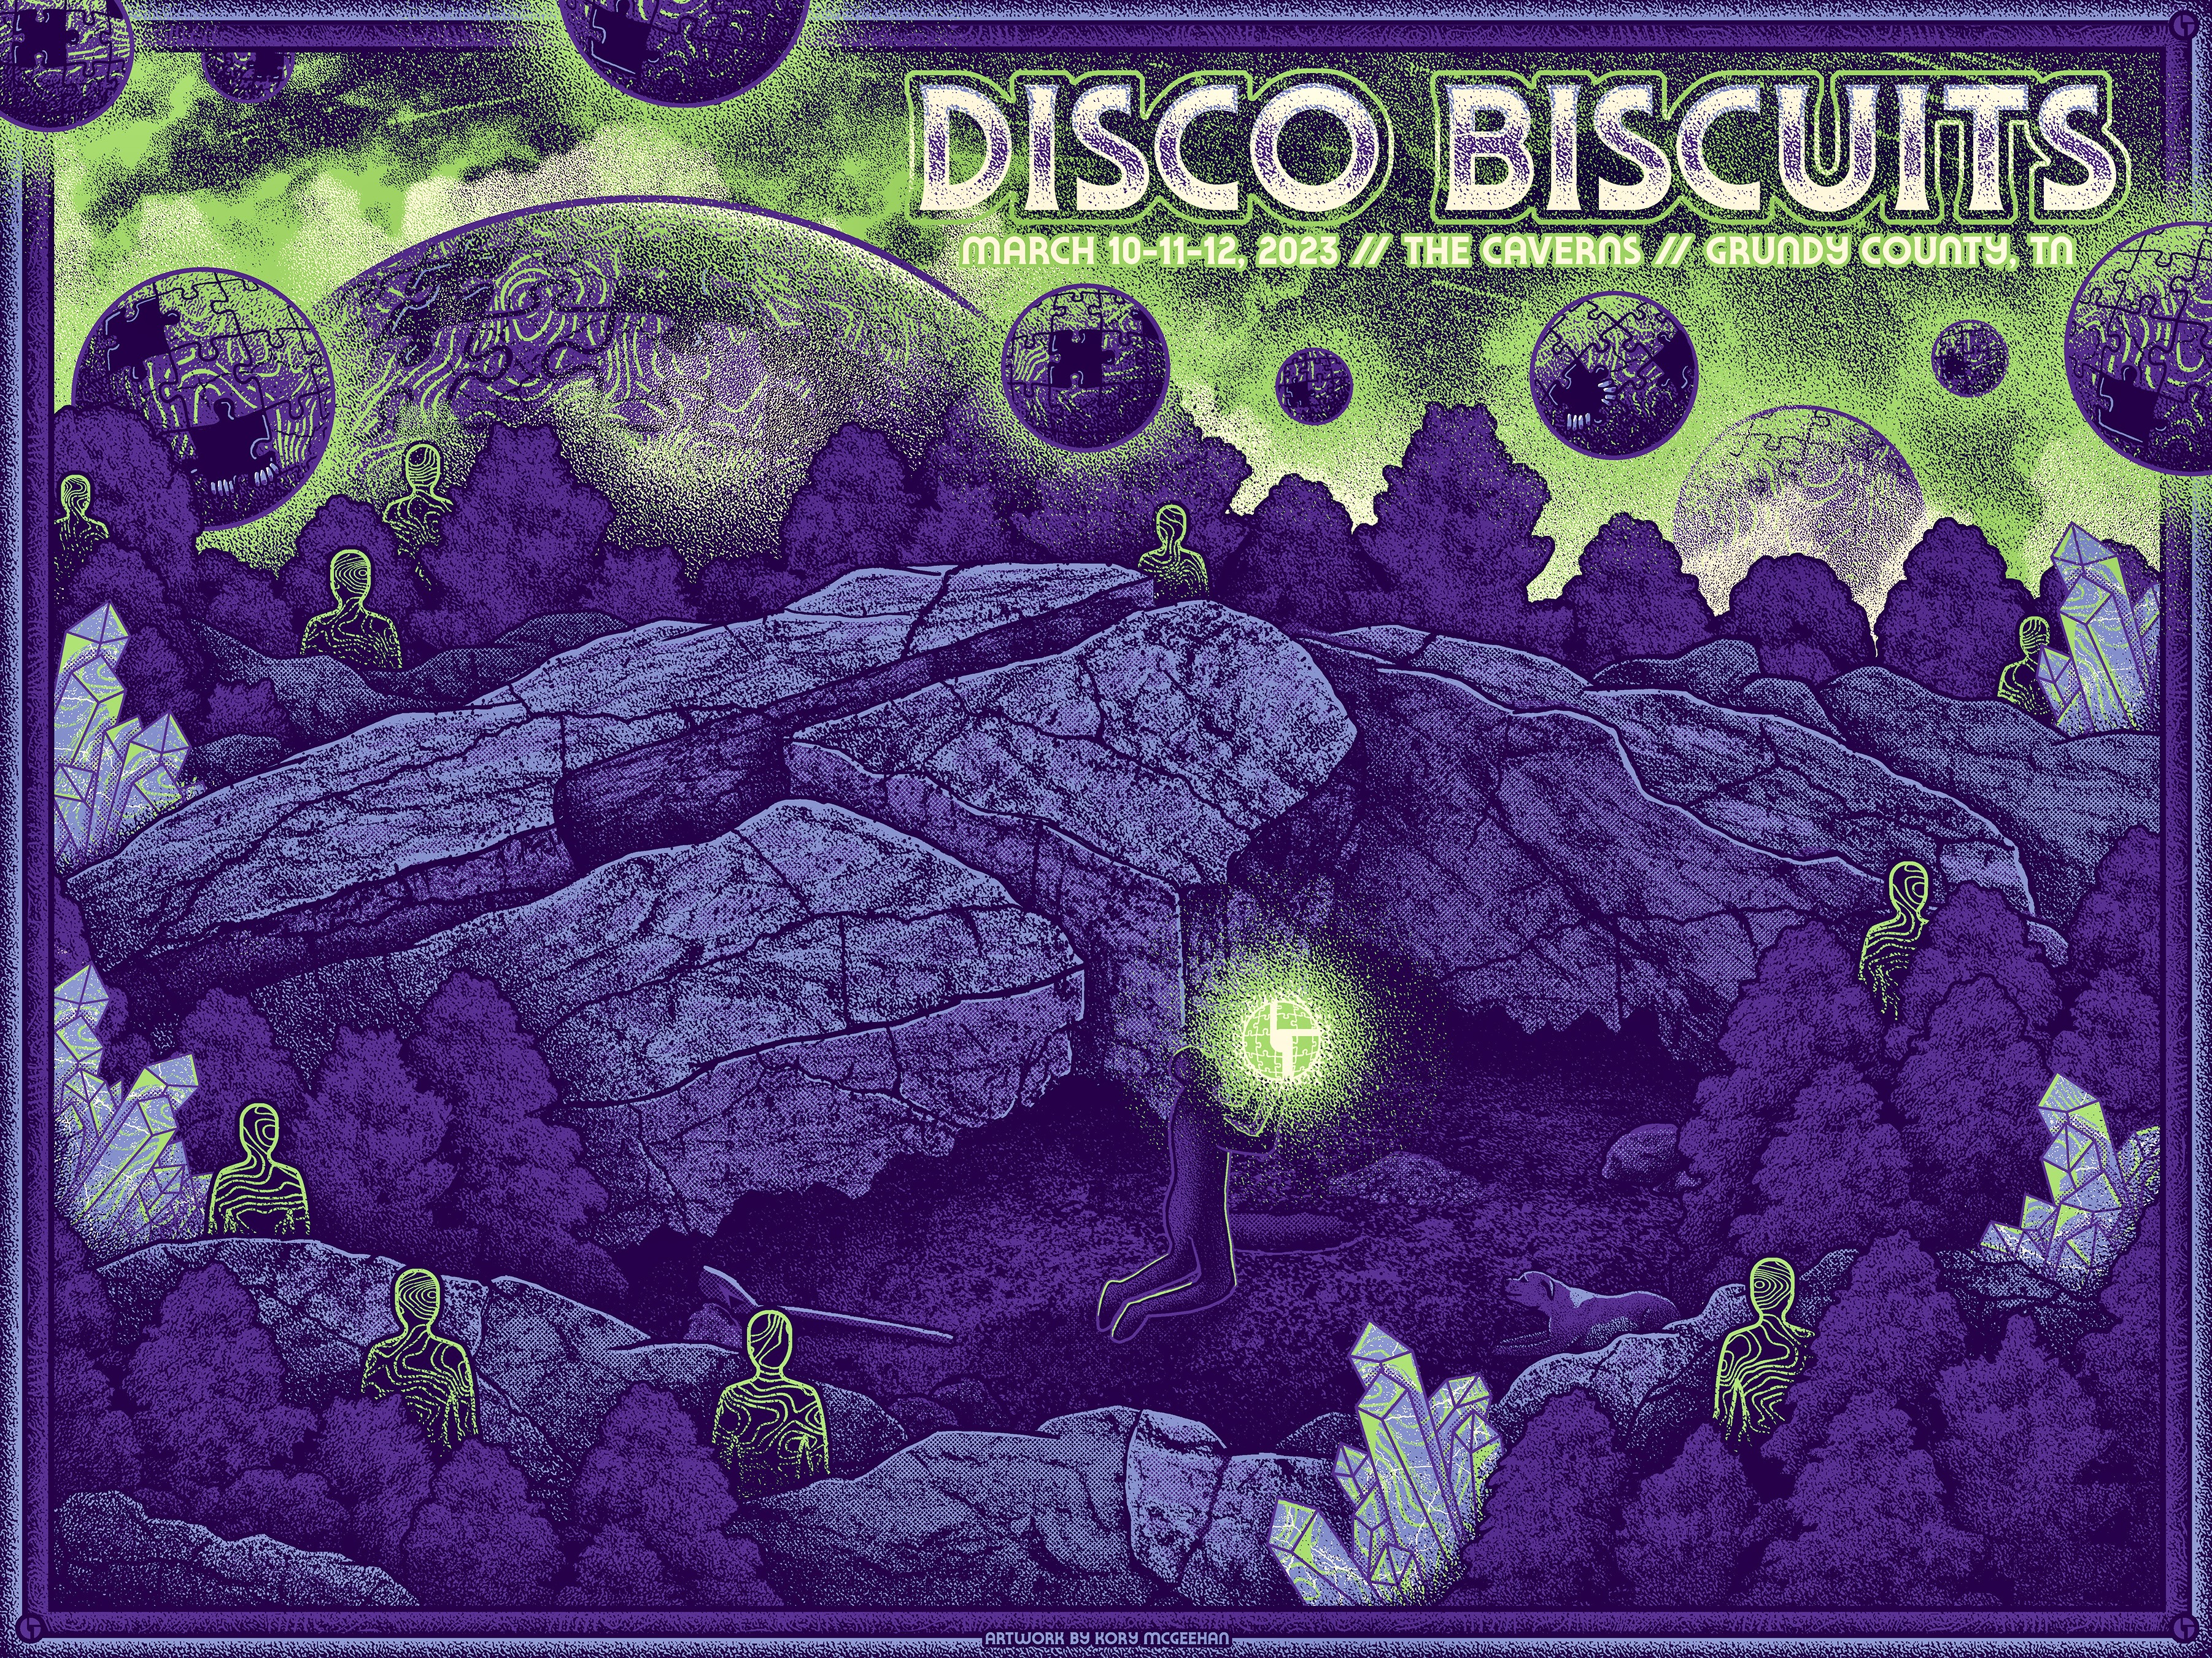 Disco Biscuits March 10-12 2023 by Kory McGeehan